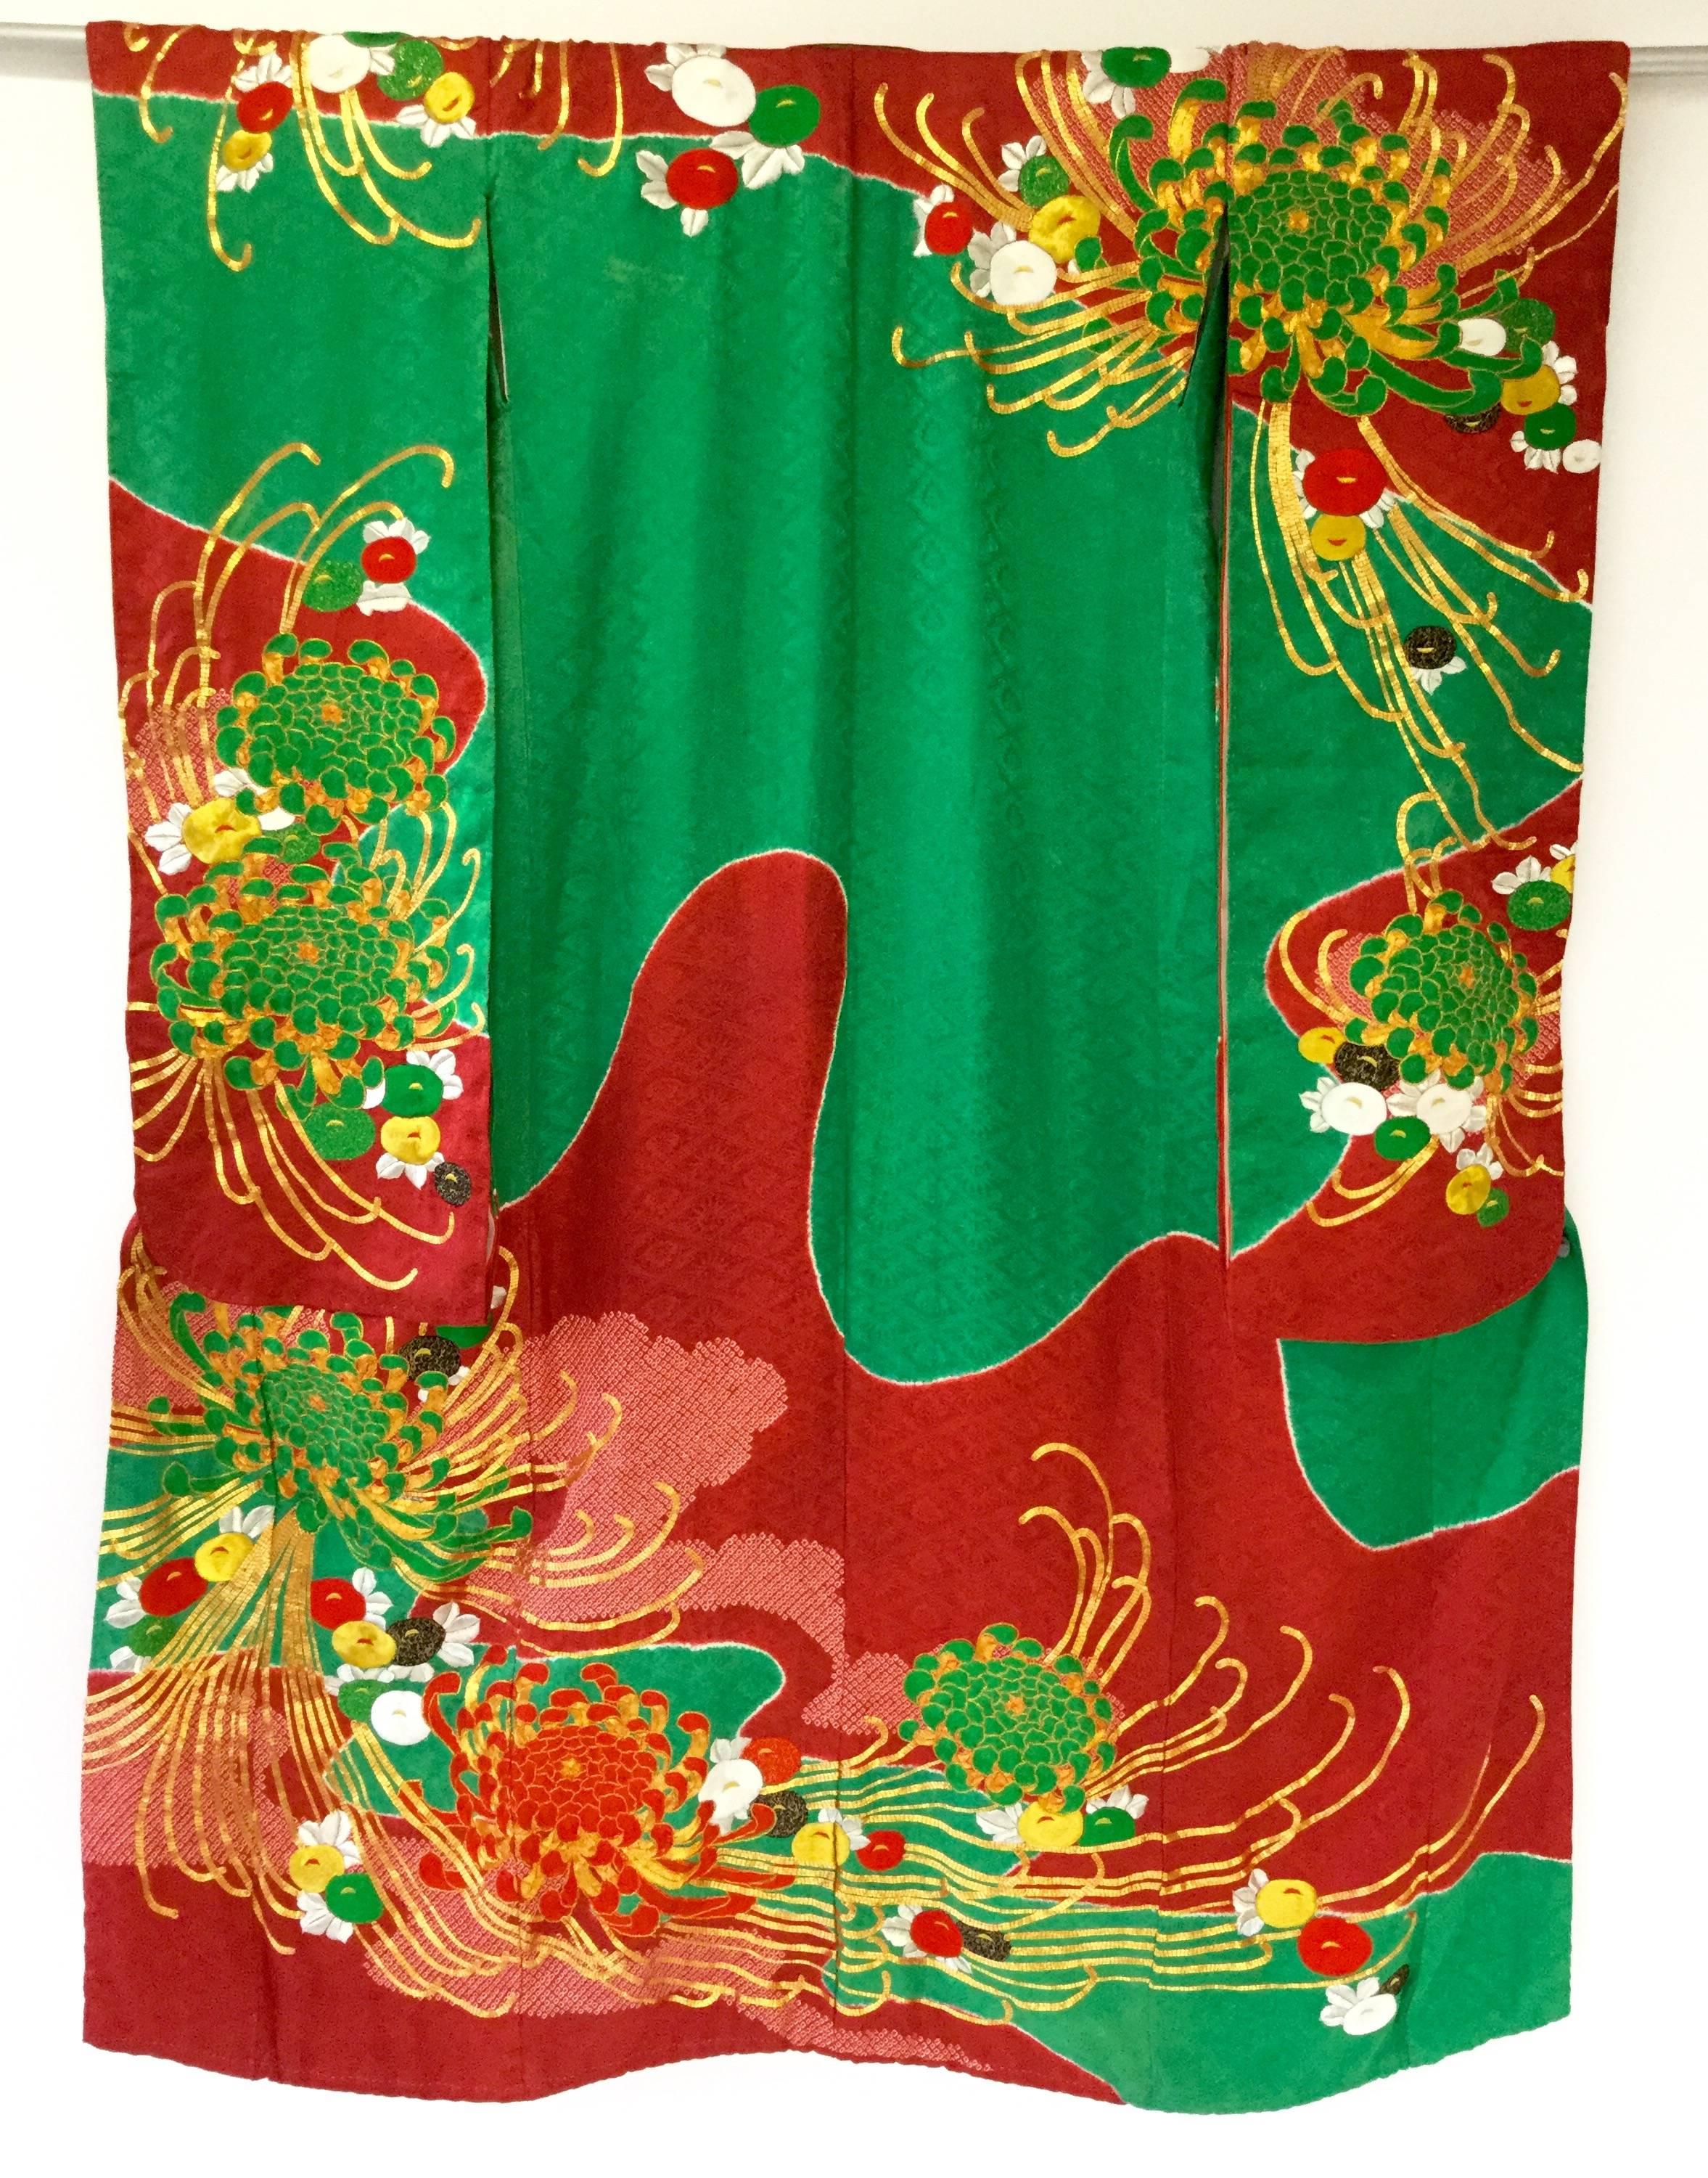 
Absolutely striking! The Uchikake kimono is a formal kimono coat work worn only by brides or by stage performers. 

This particular piece could have served as either a wedding kimono or a performance kimono because of its color and motif. This